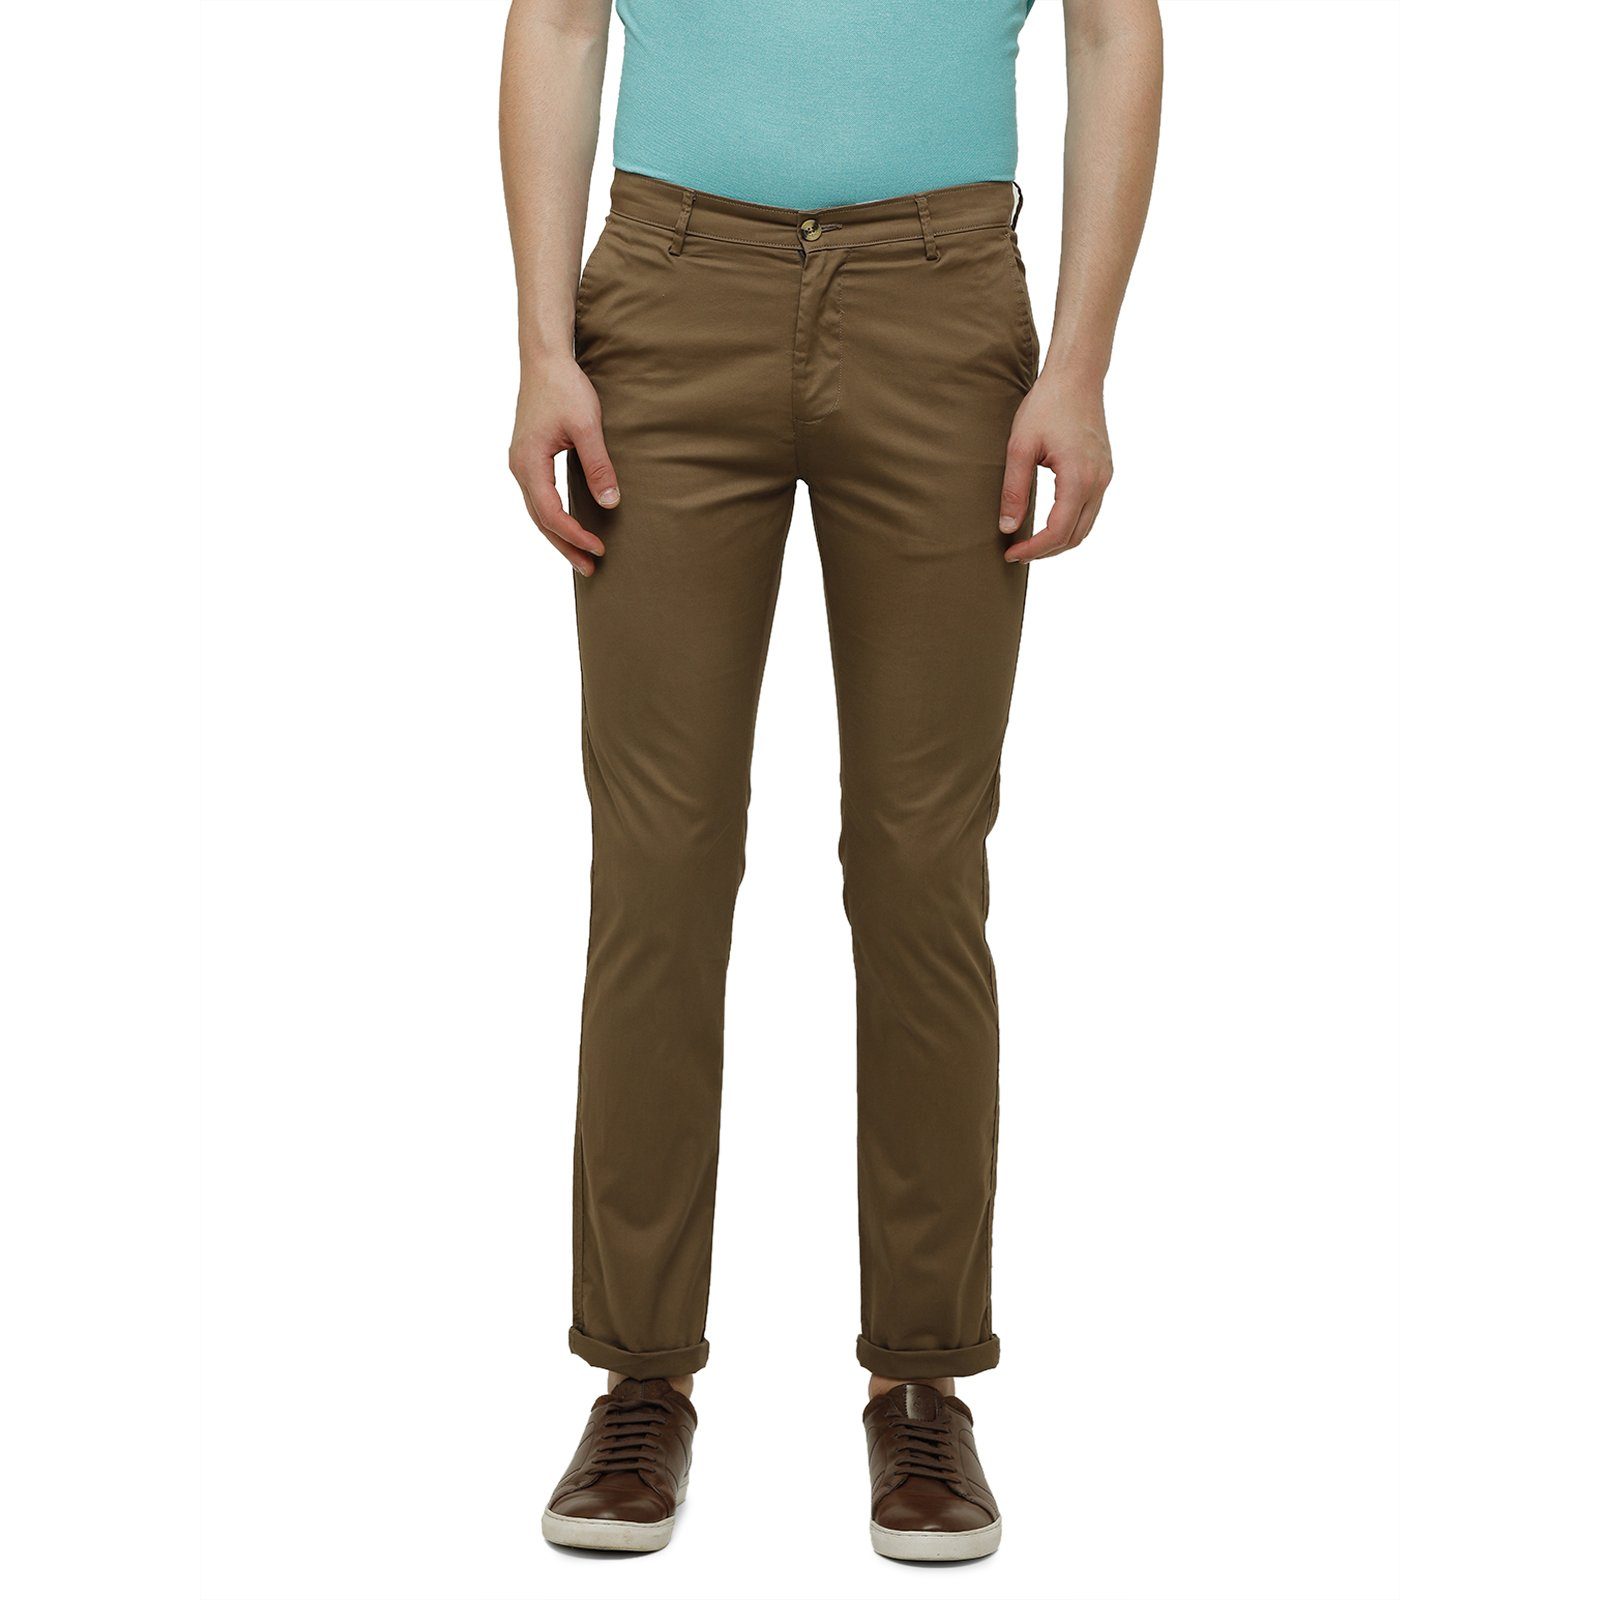 M100 Pant - Brown Puckered Cotton – s.k. manor hill